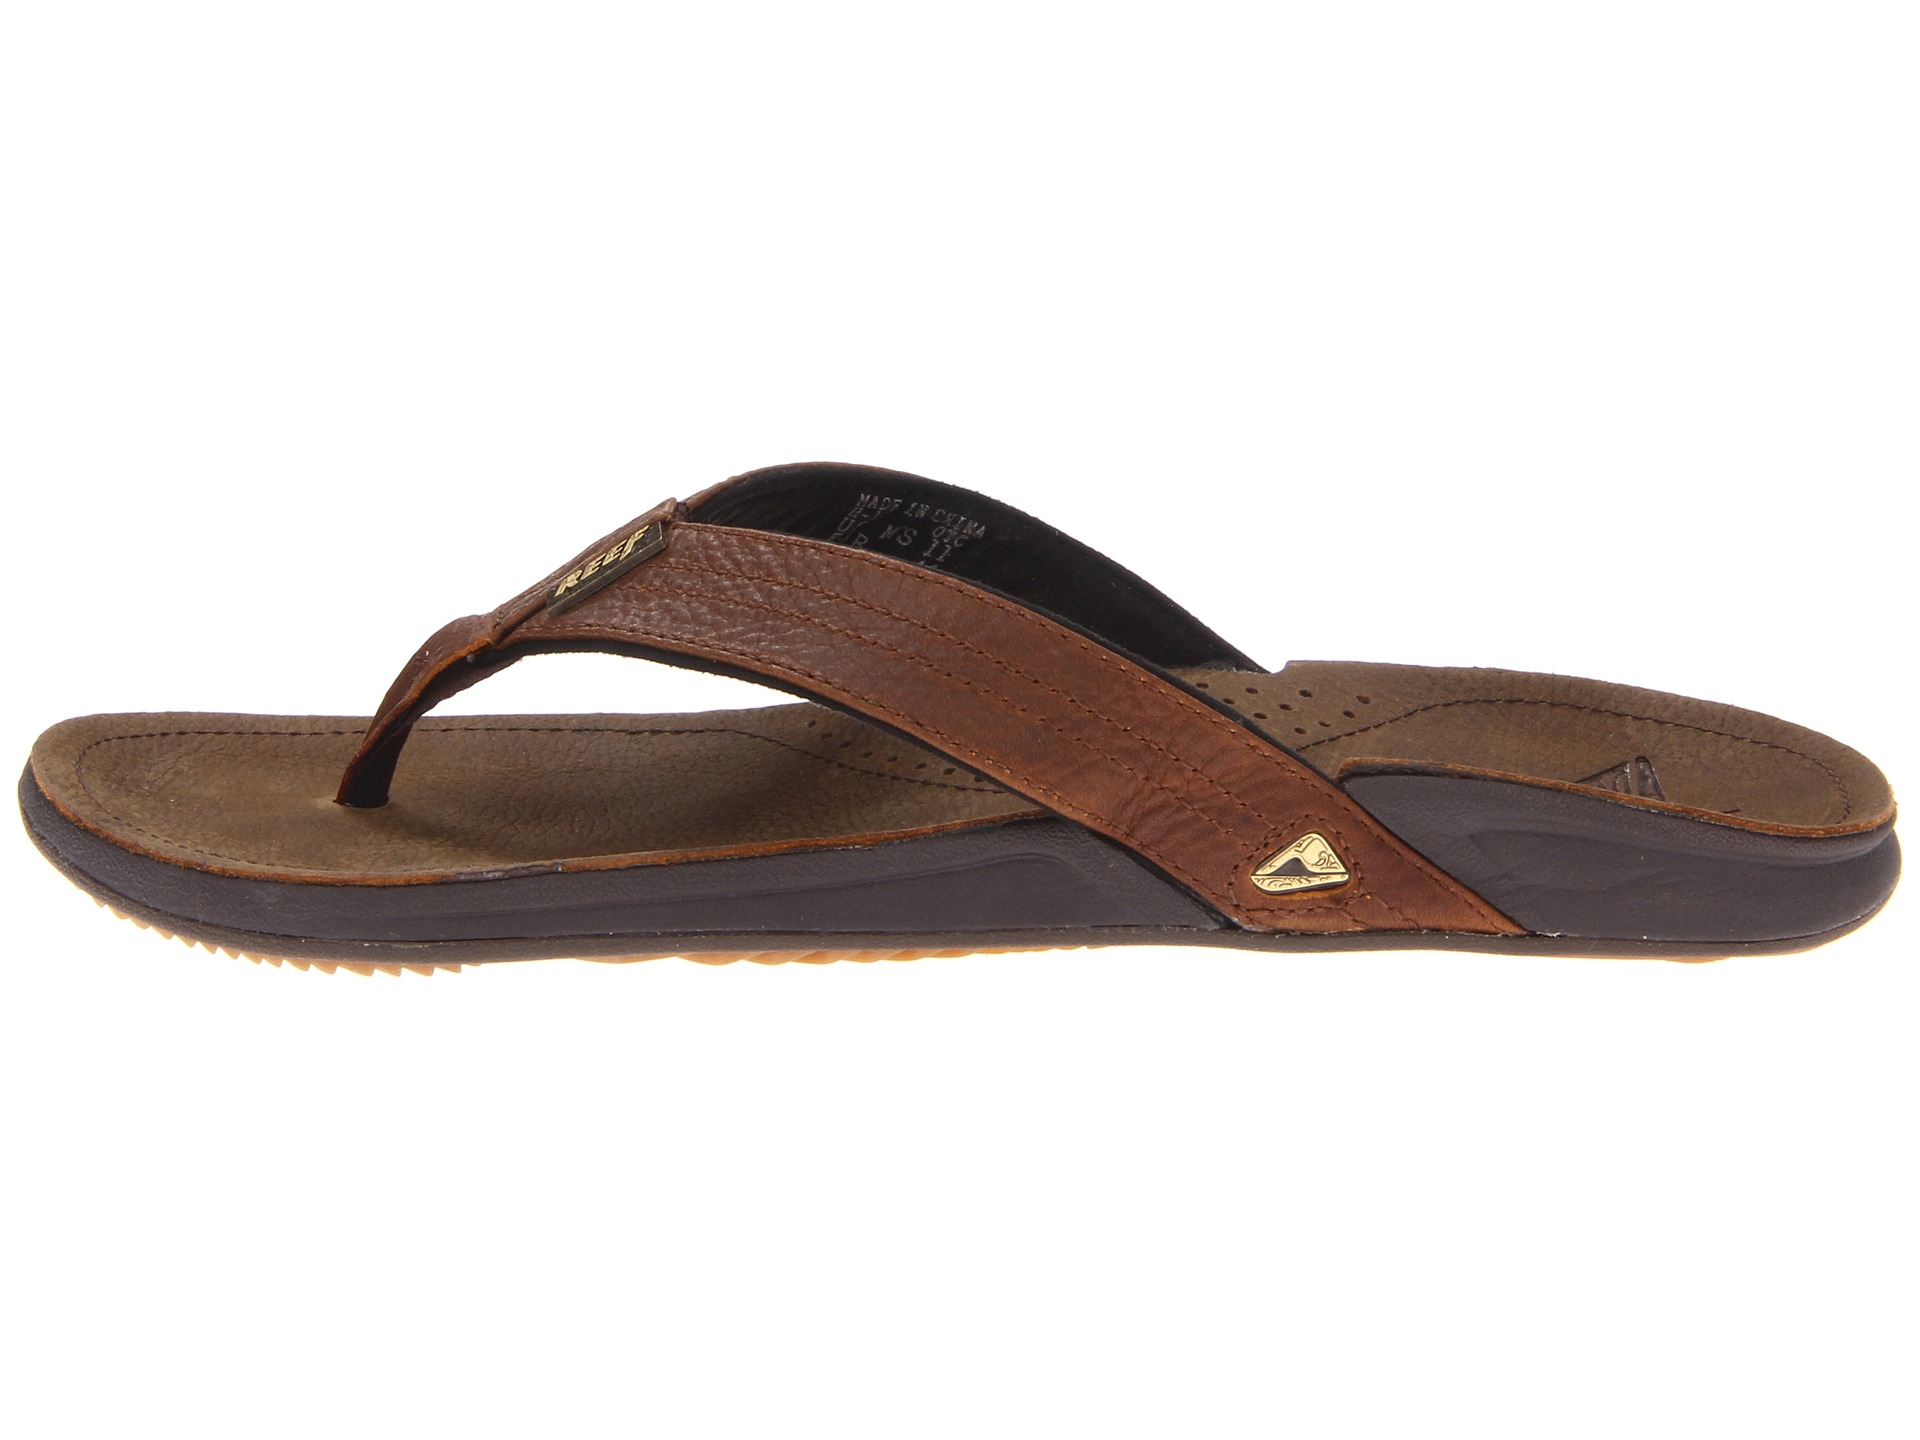 Reef Reef J Bay, Shoes | Shipped Free at Zappos